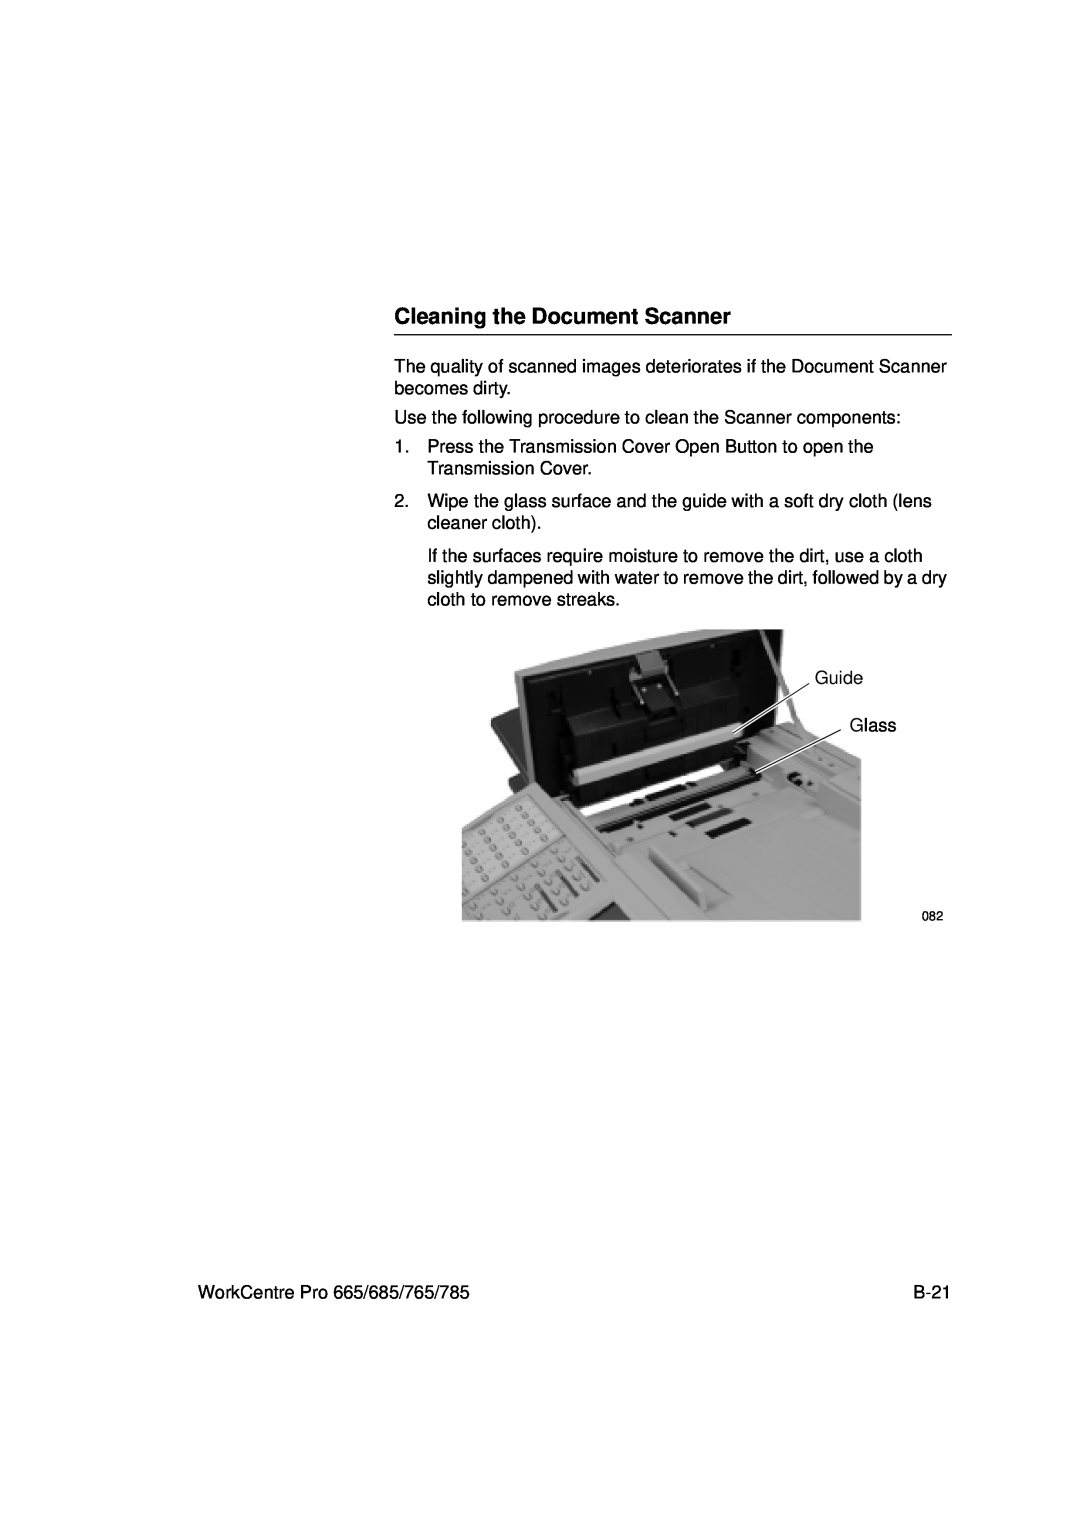 Xerox 785, 765, 665, 685 manual Cleaning the Document Scanner 